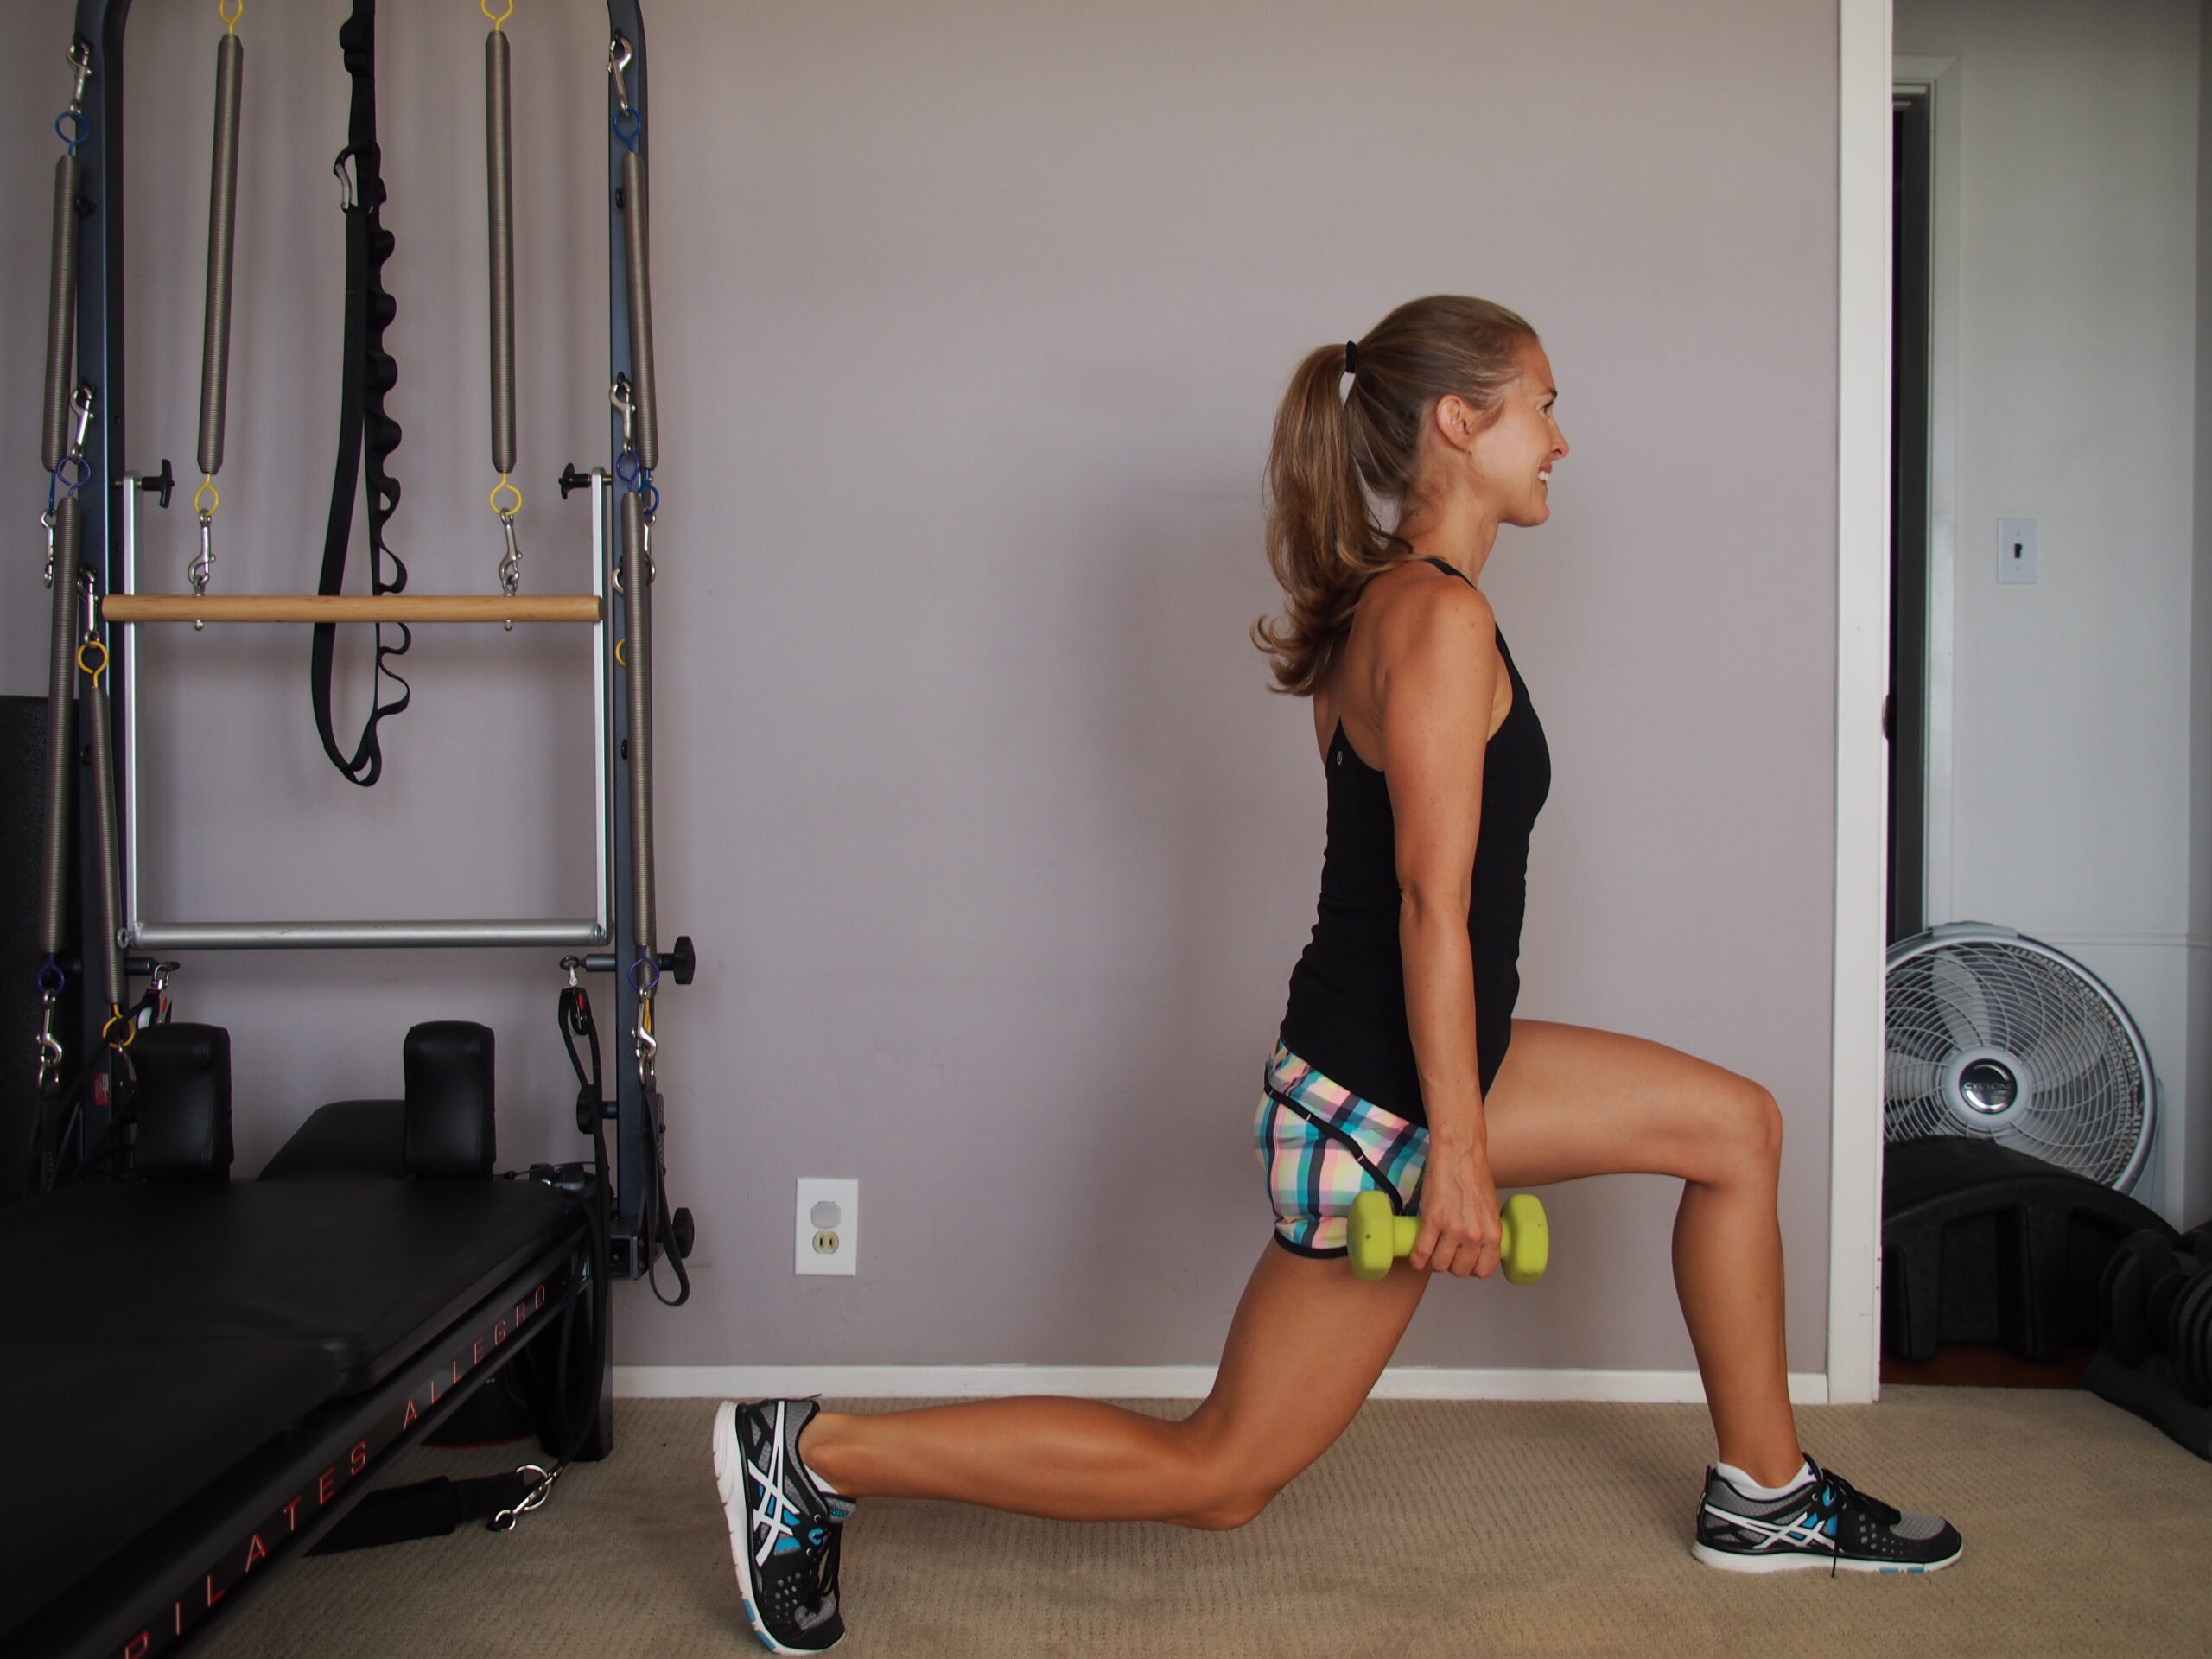 Cardio Leg Workouts: Strengthen and Tone Your Lower Body